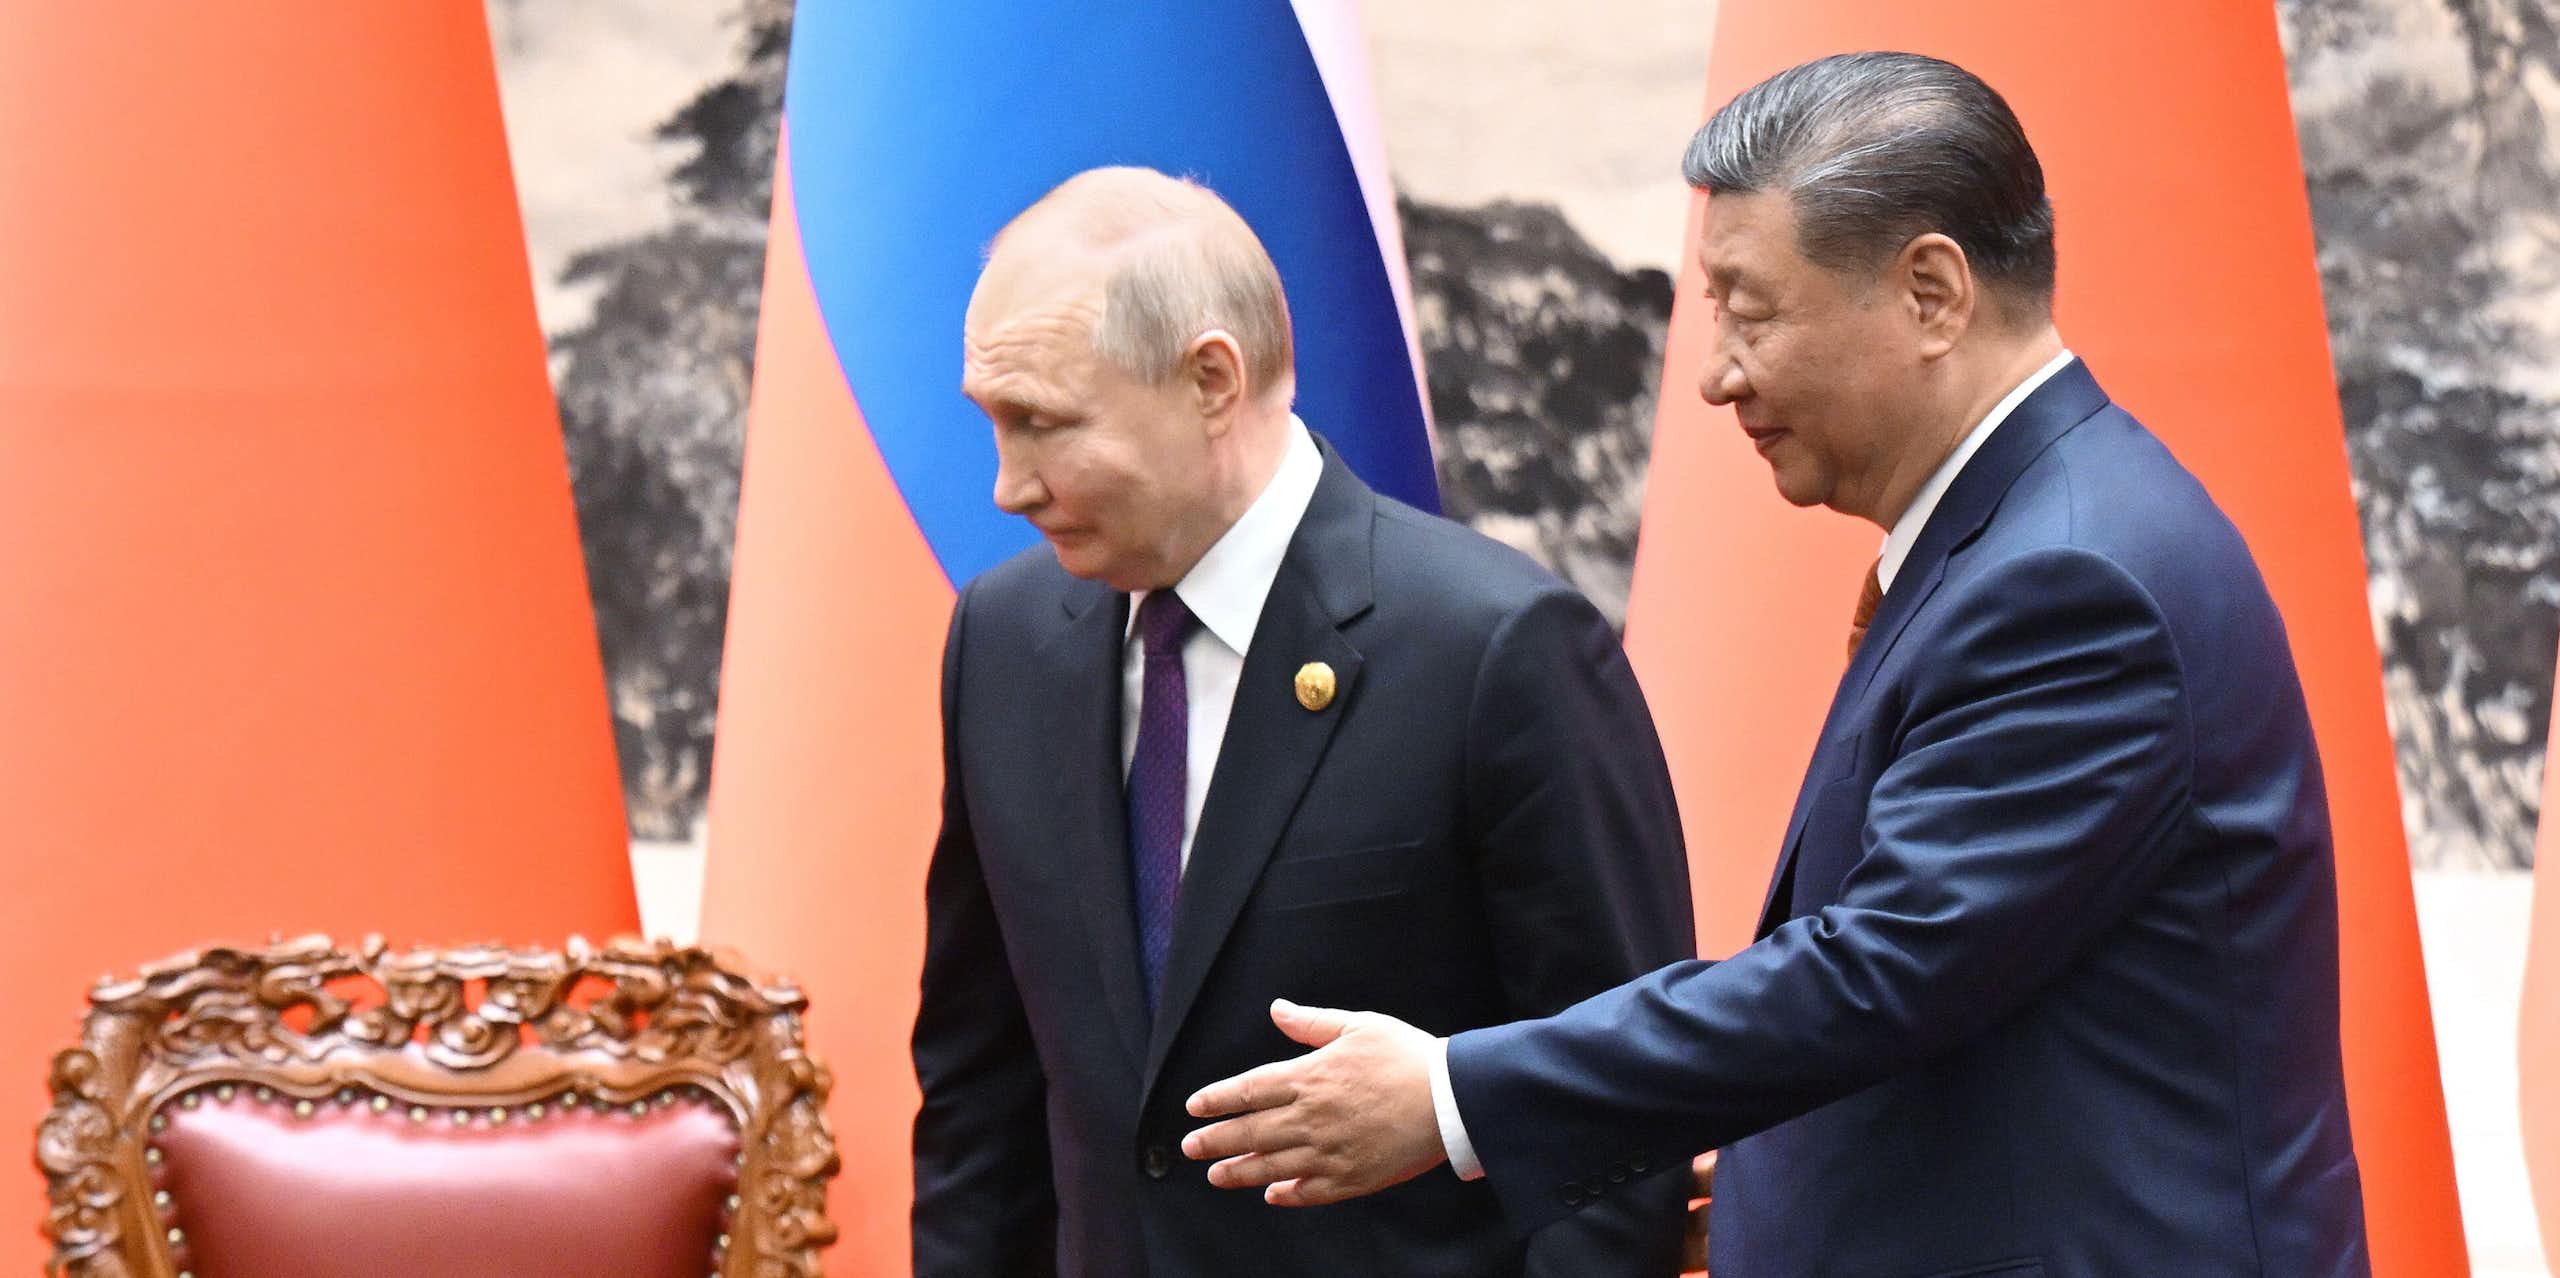 Beijing is walking a fine line between support for Russia and not angering the west too much